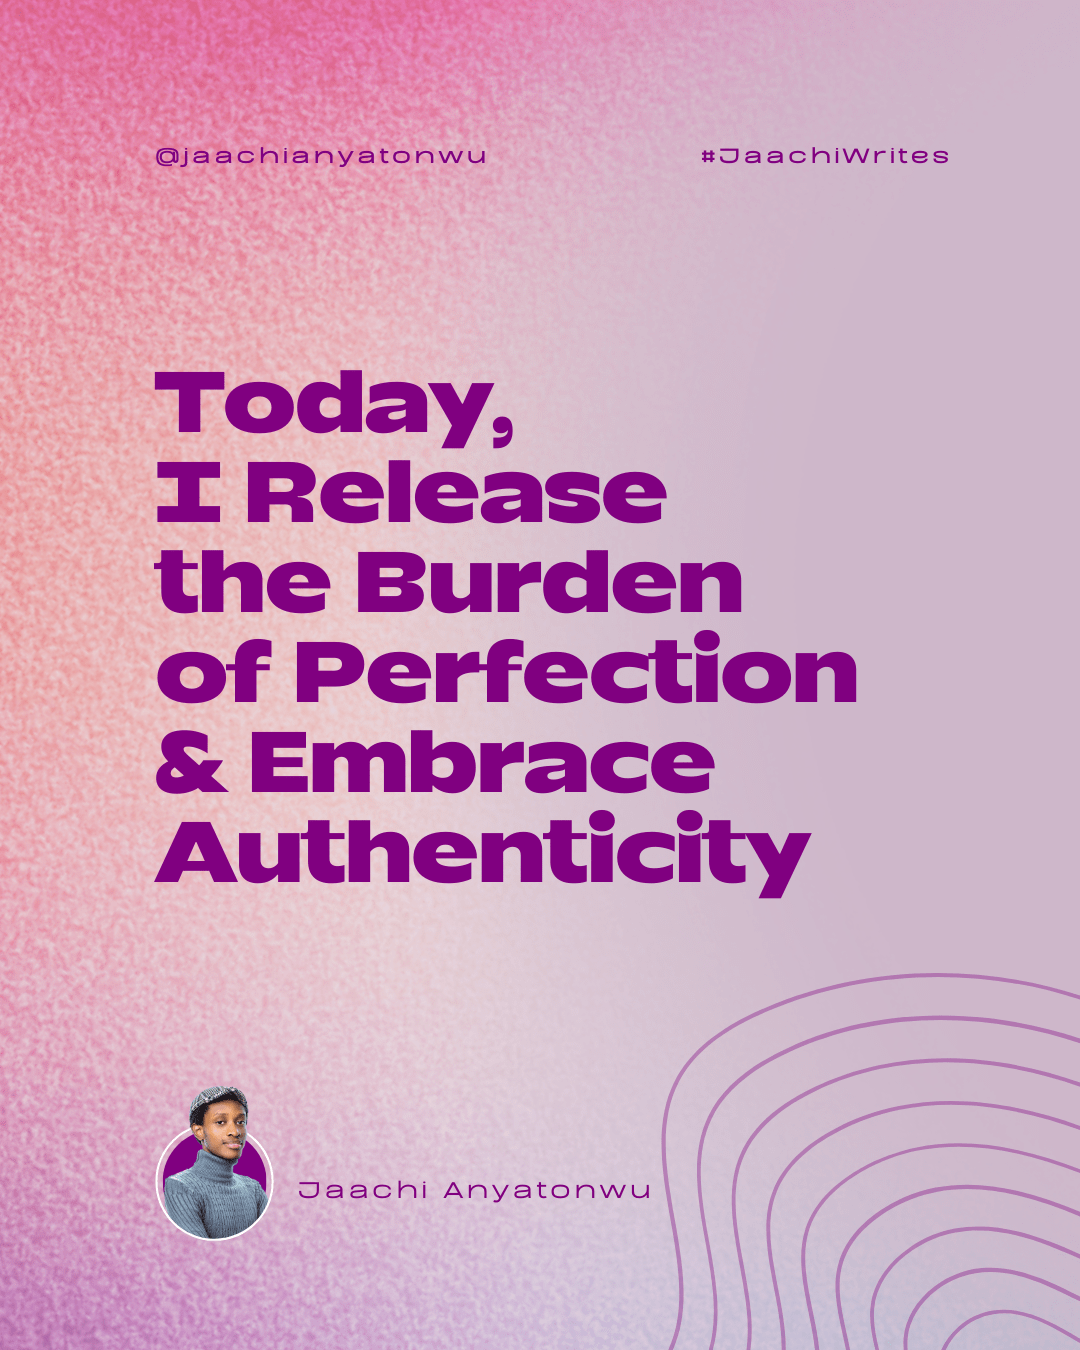 Today, I Release the Burden of Perfection and Embrace Authenticity